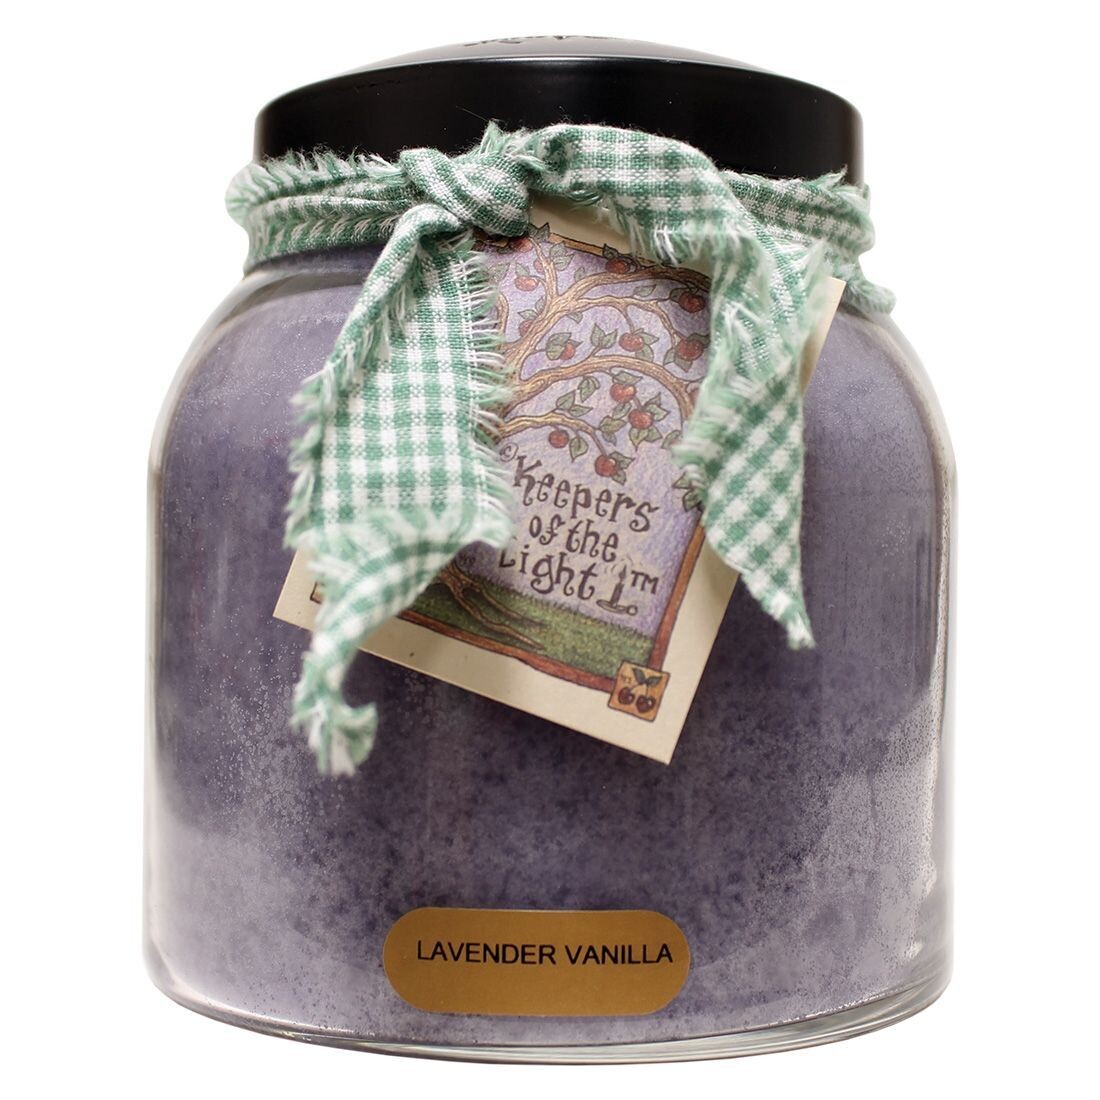 Lavender  Vanilla - Papa Jar - 34 oz - Double Wick - Keepers of the Light Candle